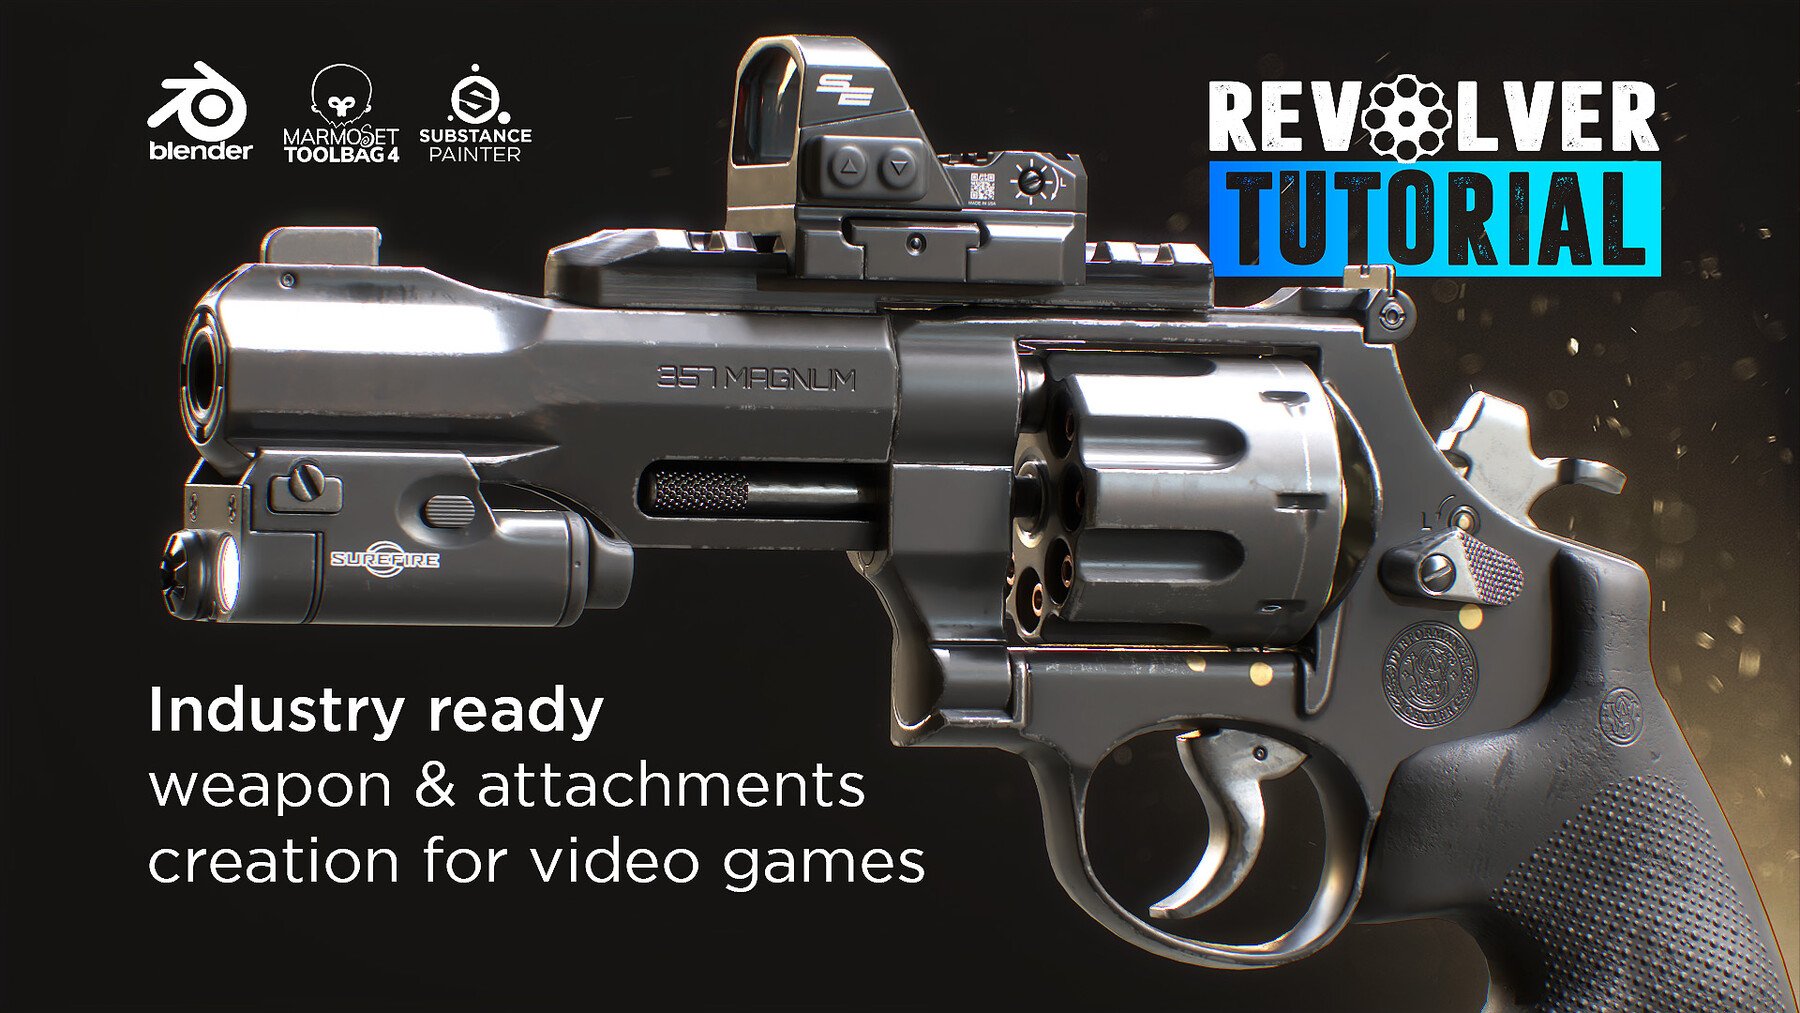 Revolver Tutorial – Industry Ready Weapon & Attachment Creation for Video Games